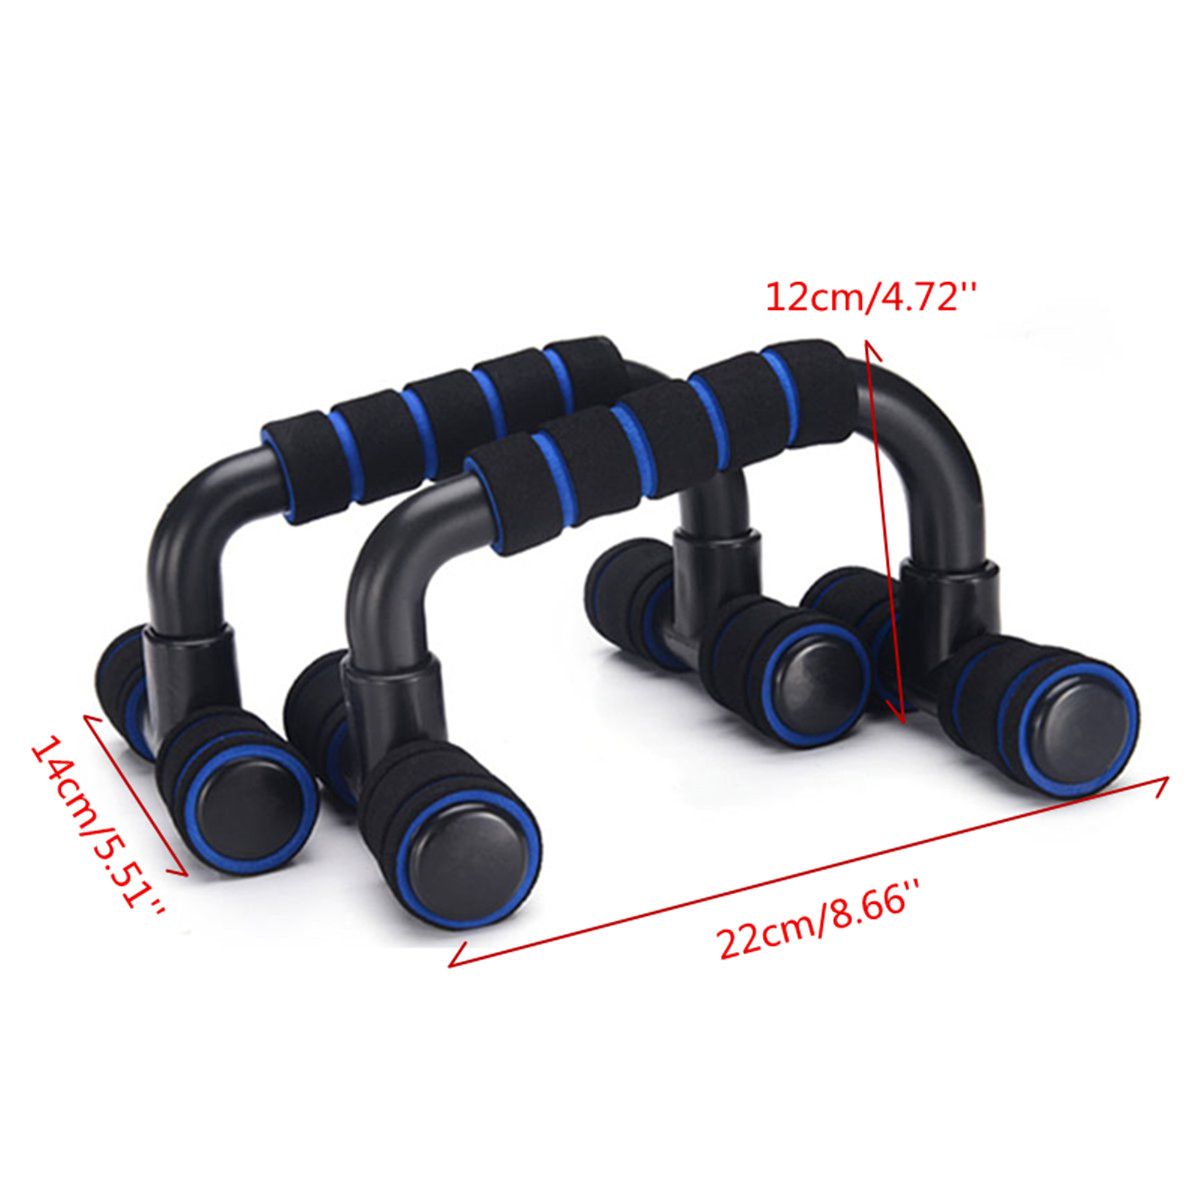 2PCS-Handle-Push-Up-Stand-BarsChest-Arms-Training-Exercise-Home-Fitness-Tool-1287591